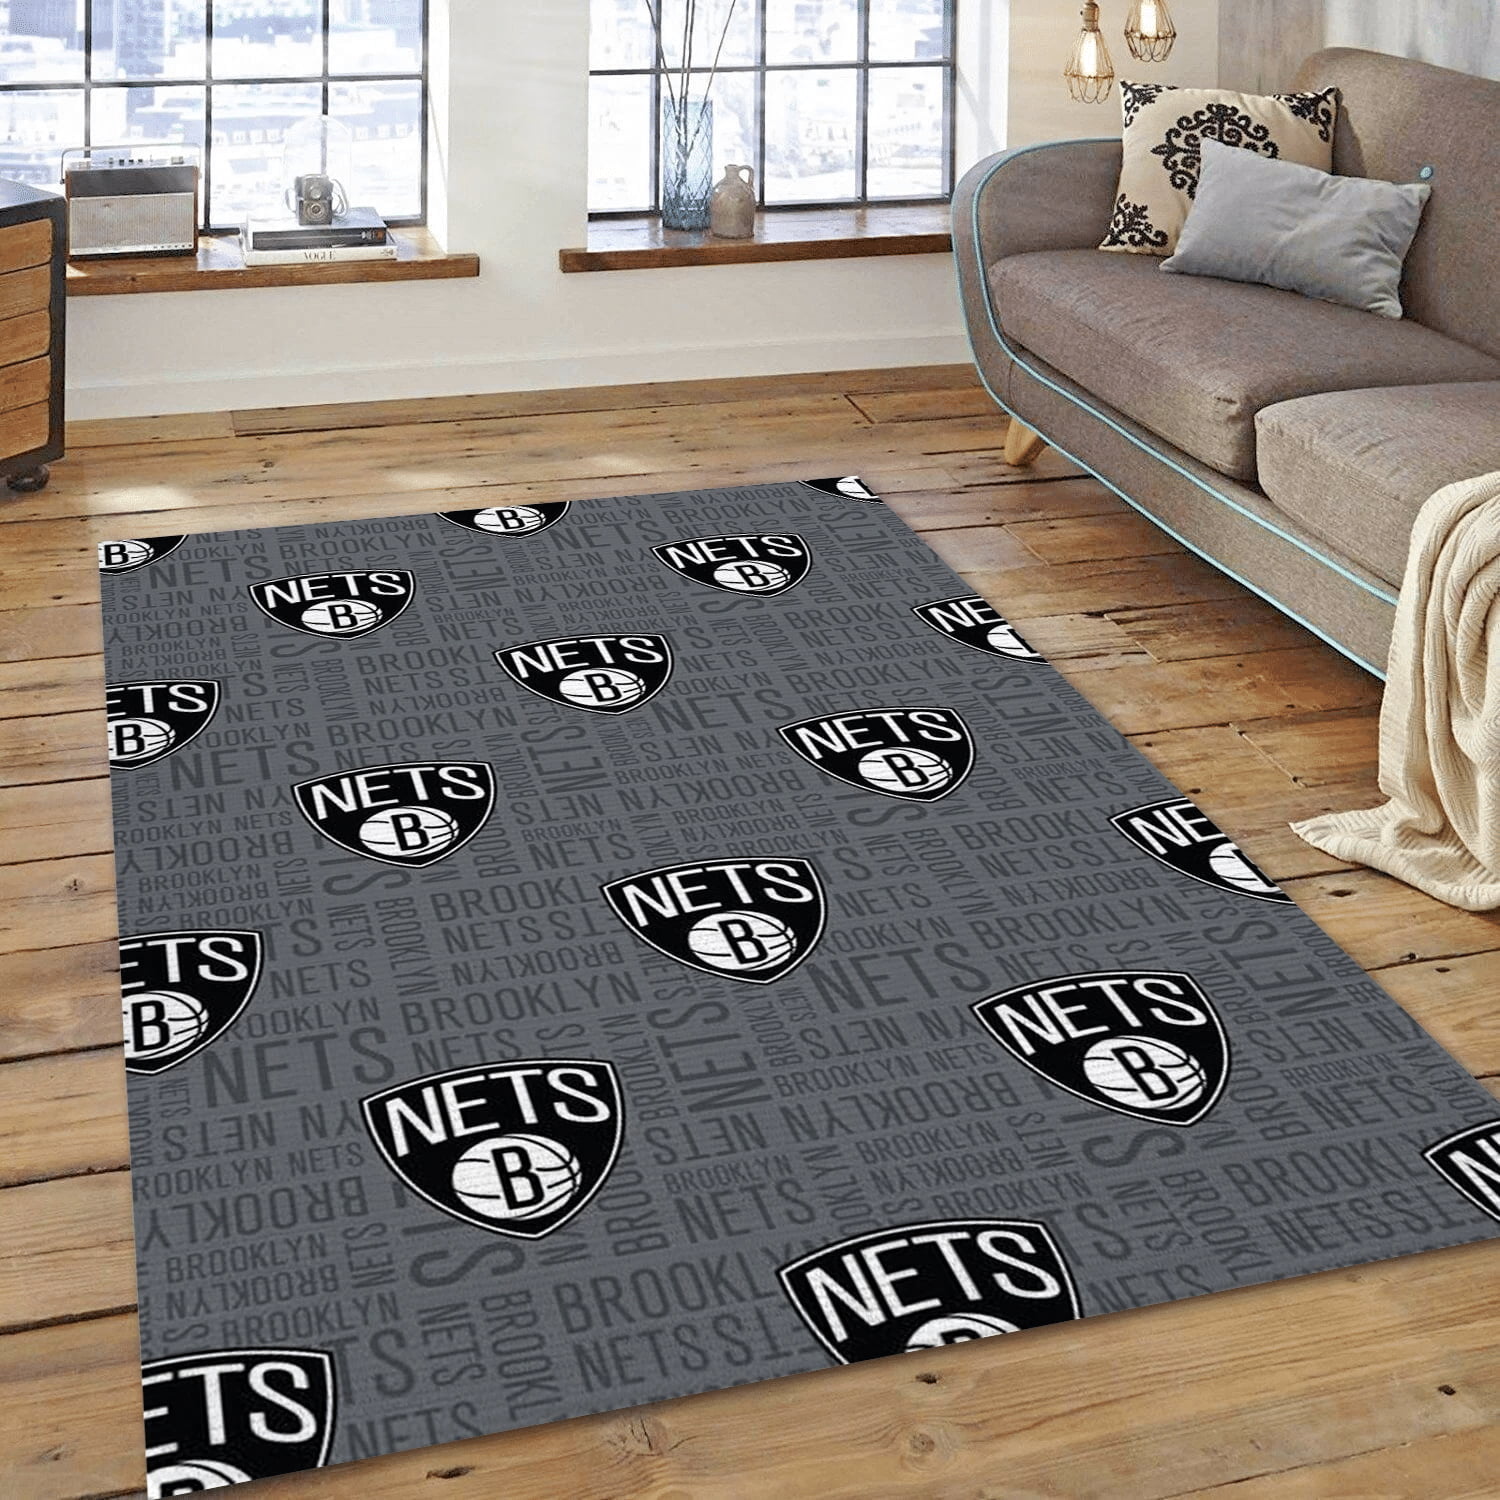 Brooklyn Nets Patterns Area Rug Carpet, Bedroom Rug - Family Gift US Decor - Indoor Outdoor Rugs